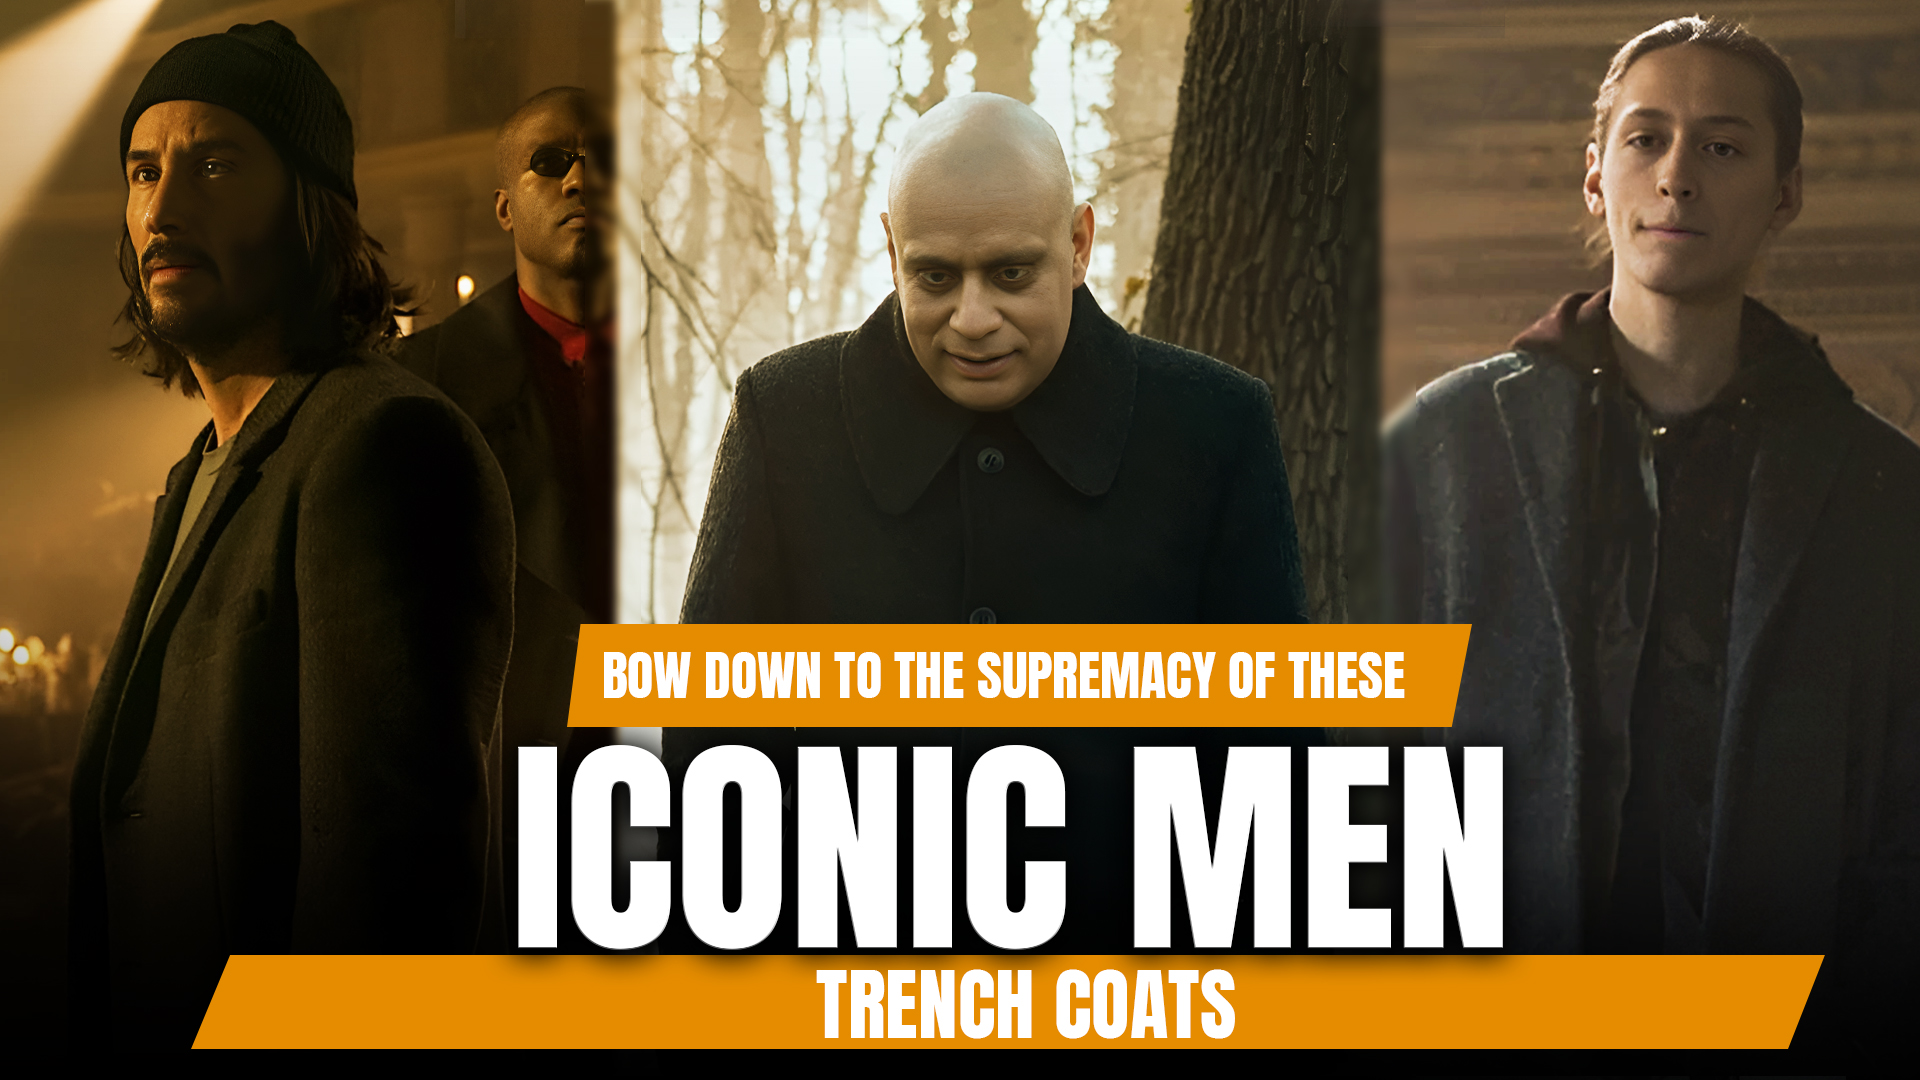 Bow Down To The Supremacy Of These Iconic Men Trench Coats